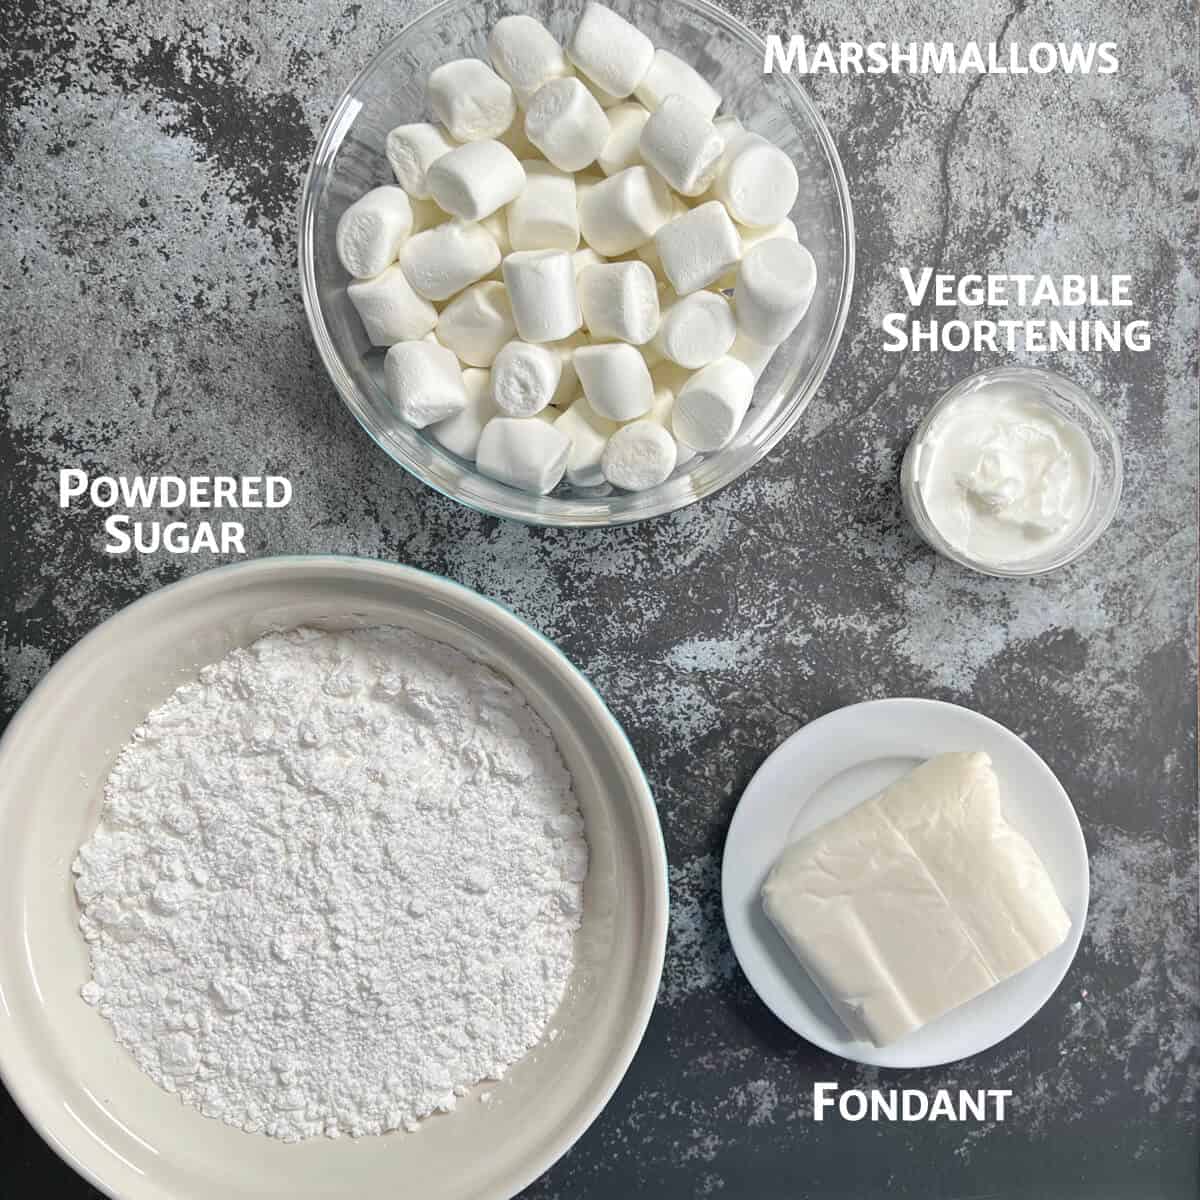 Ingredients for marshmallow fondant portioned into bowls from overhead.